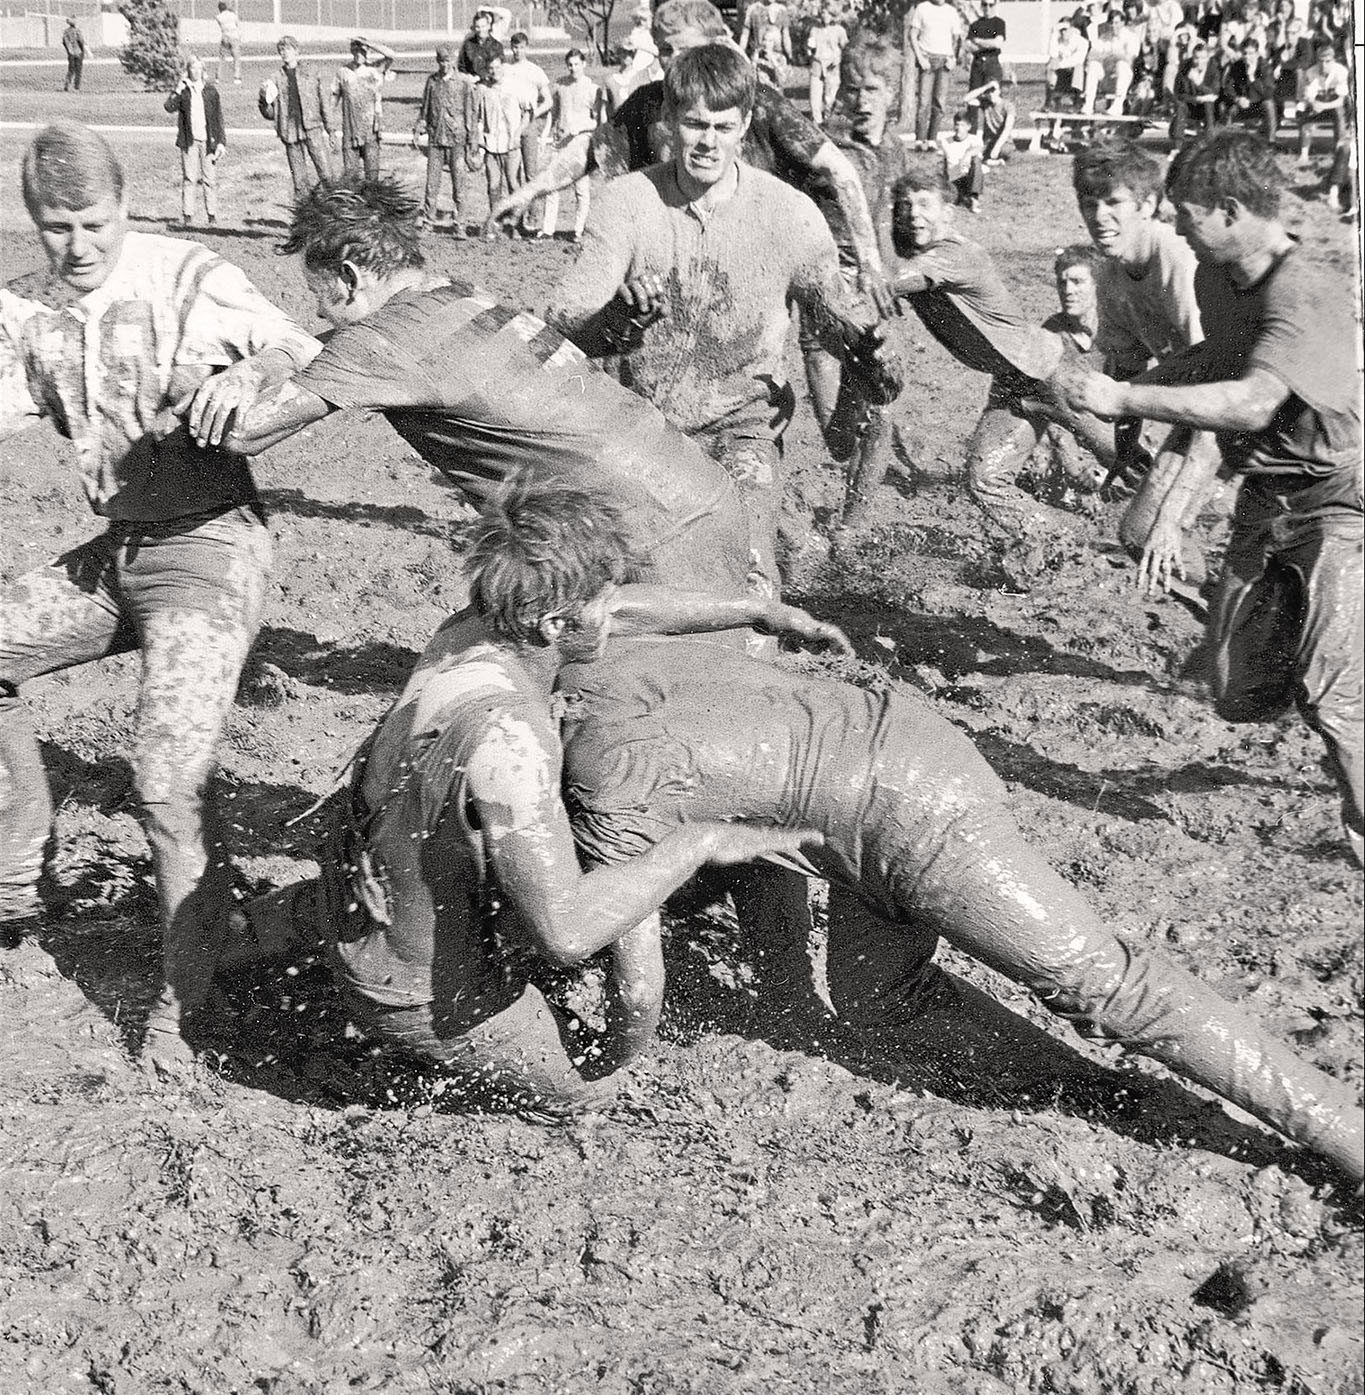 Students in 1968 celebrate Homecoming with a mud bowl in a field